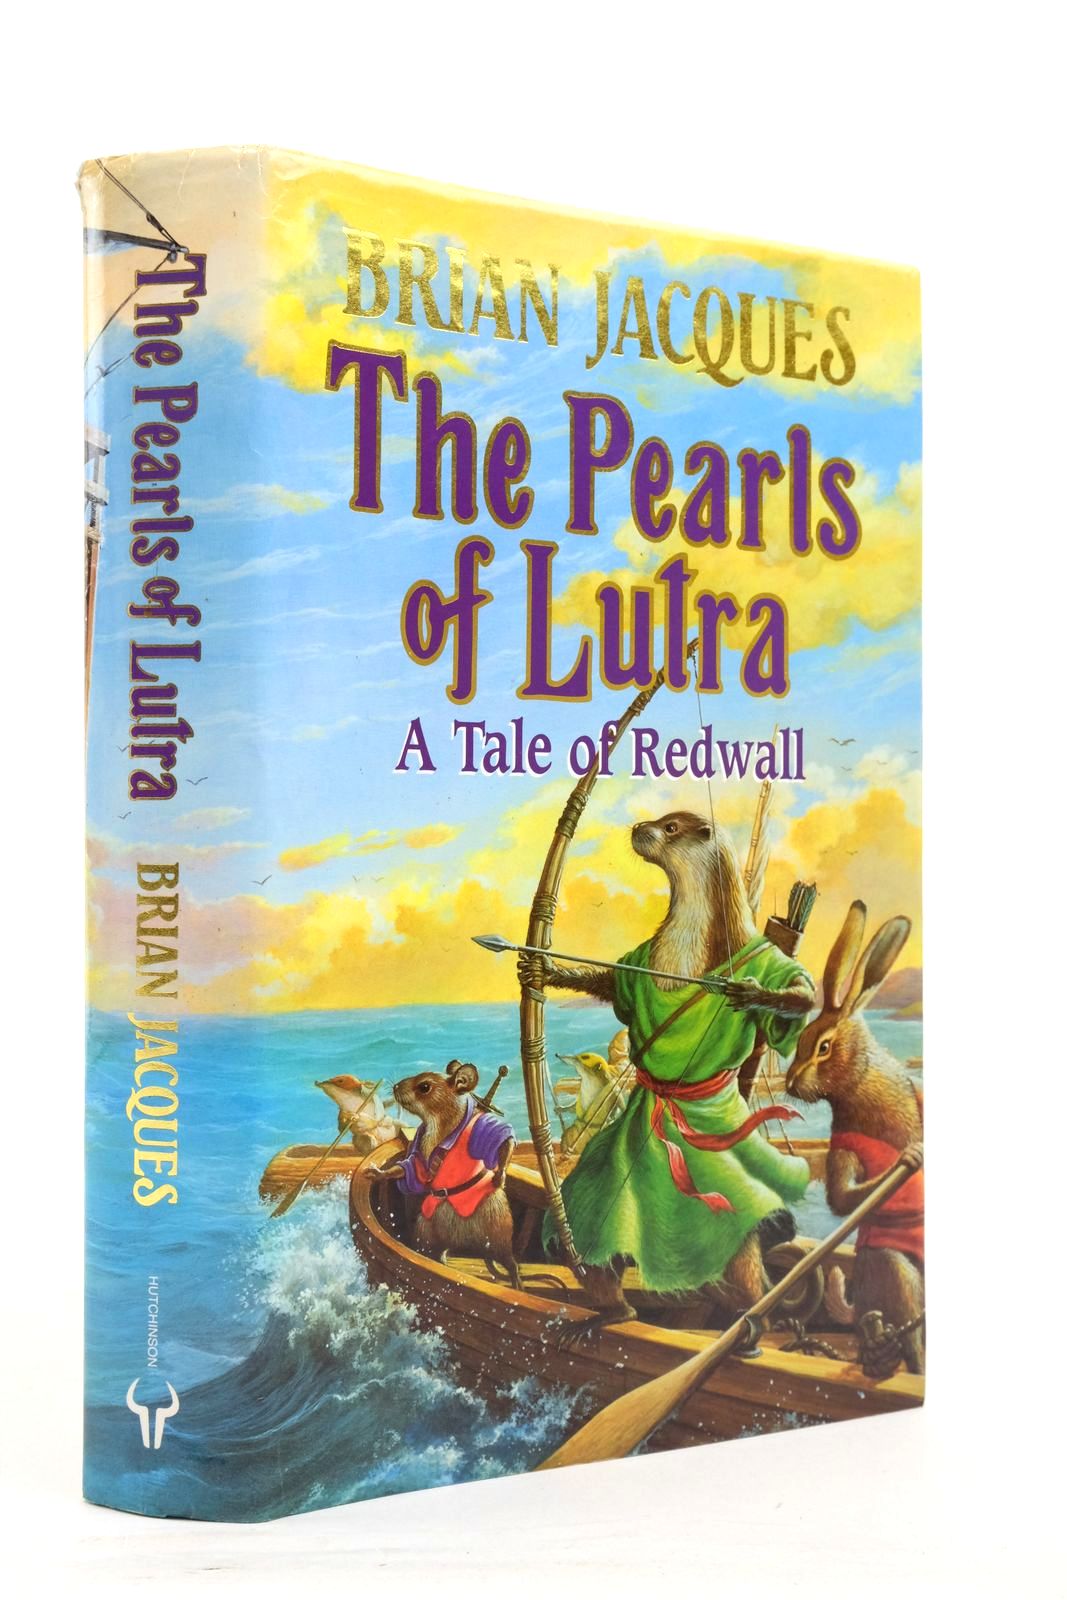 Photo of THE PEARLS OF LUTRA written by Jacques, Brian illustrated by Curless, Allan published by Hutchinson (STOCK CODE: 2137932)  for sale by Stella & Rose's Books